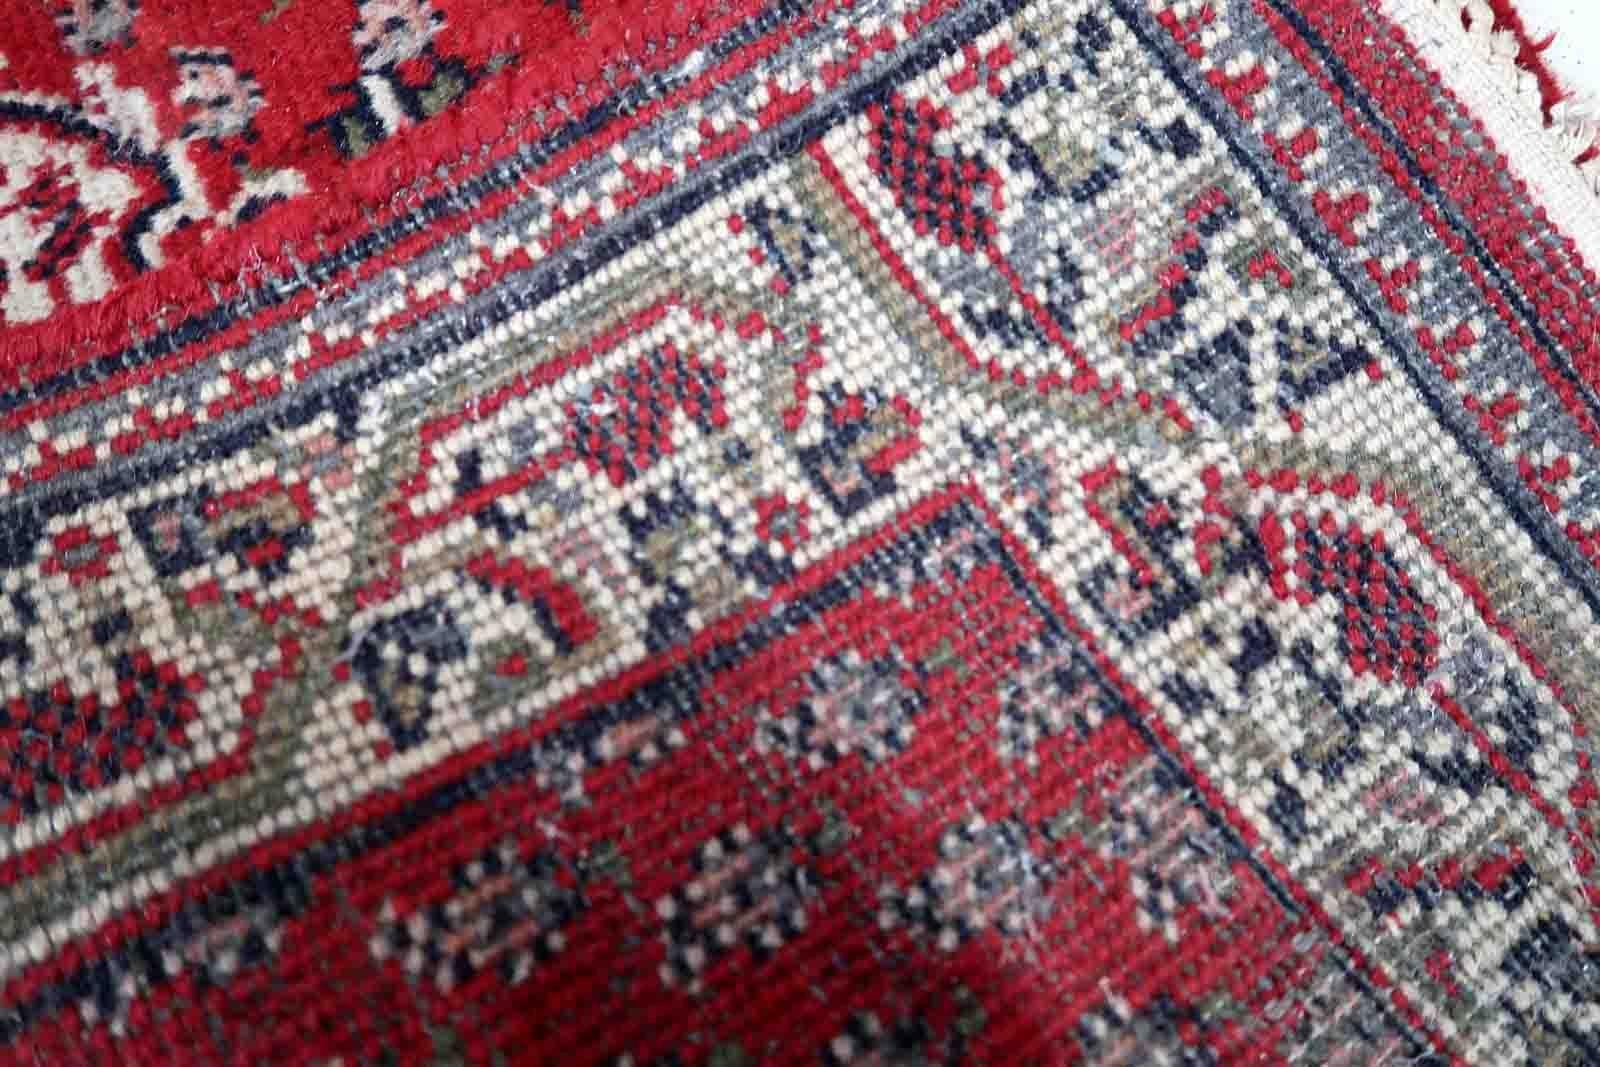 Handmade vintage Indian Seranad rug in traditional design with medallion and red wool.The rug is from the end of 20th century in original condition, it has low pile.

-condition: original, low pile,

-circa: 1970s,

-size: 2.4' x 4.6' (74cm x